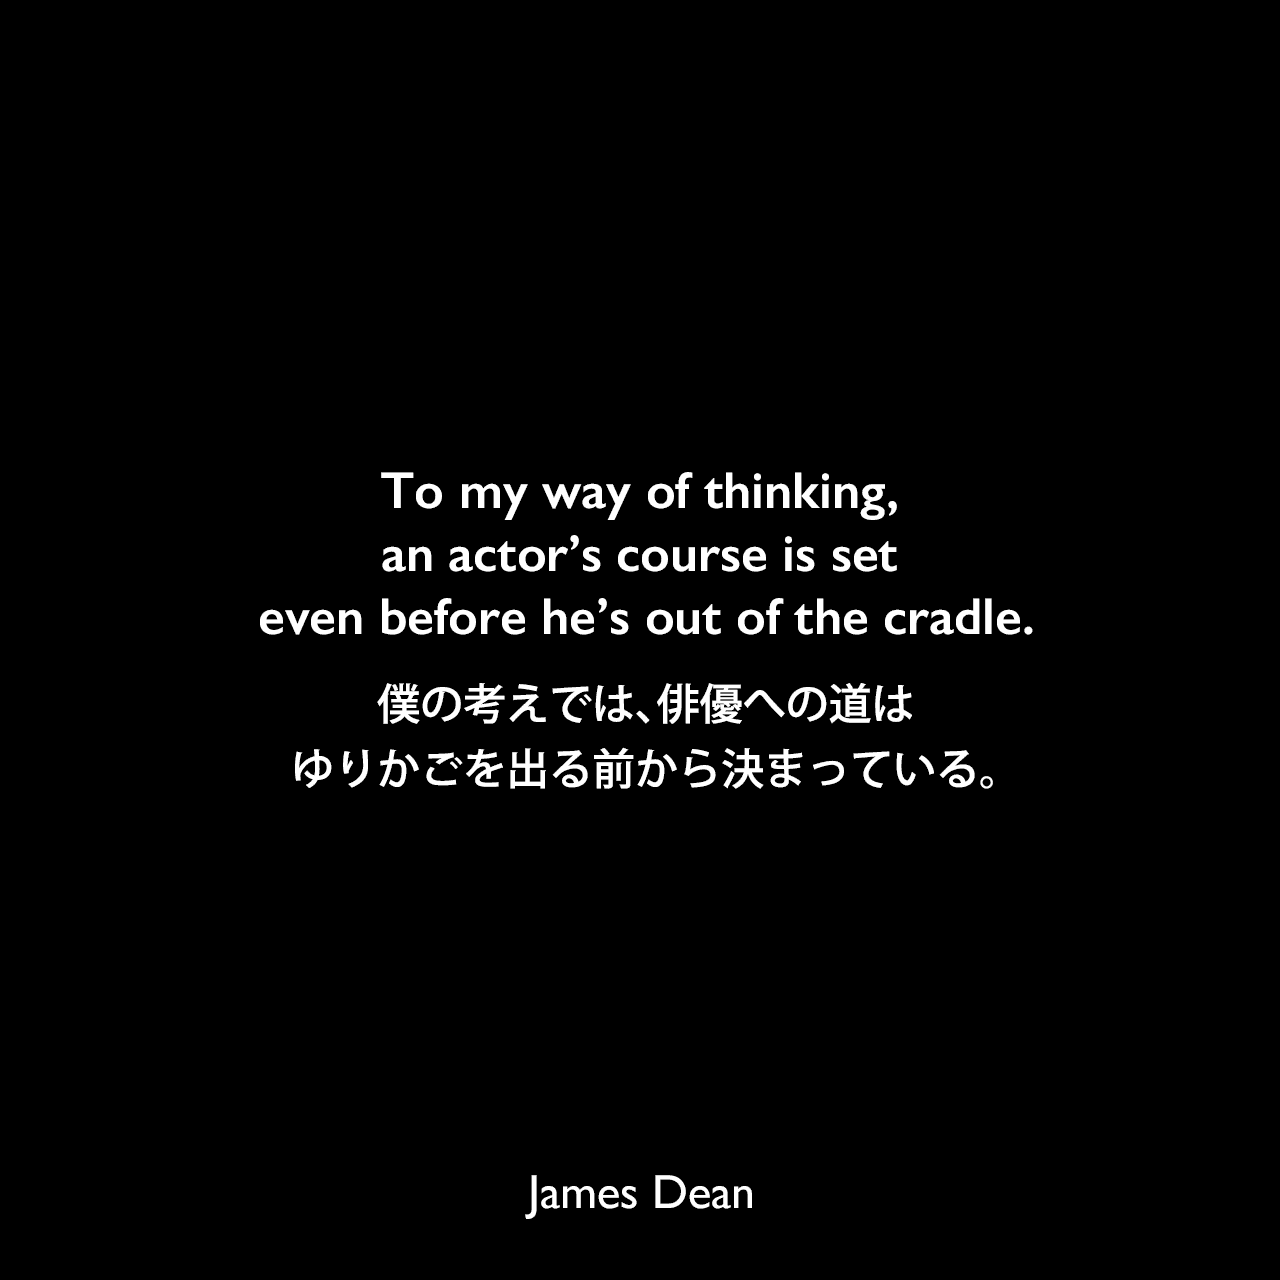 To my way of thinking, an actor’s course is set even before he’s out of the cradle.僕の考えでは、俳優への道は、ゆりかごを出る前から決まっている。James Dean